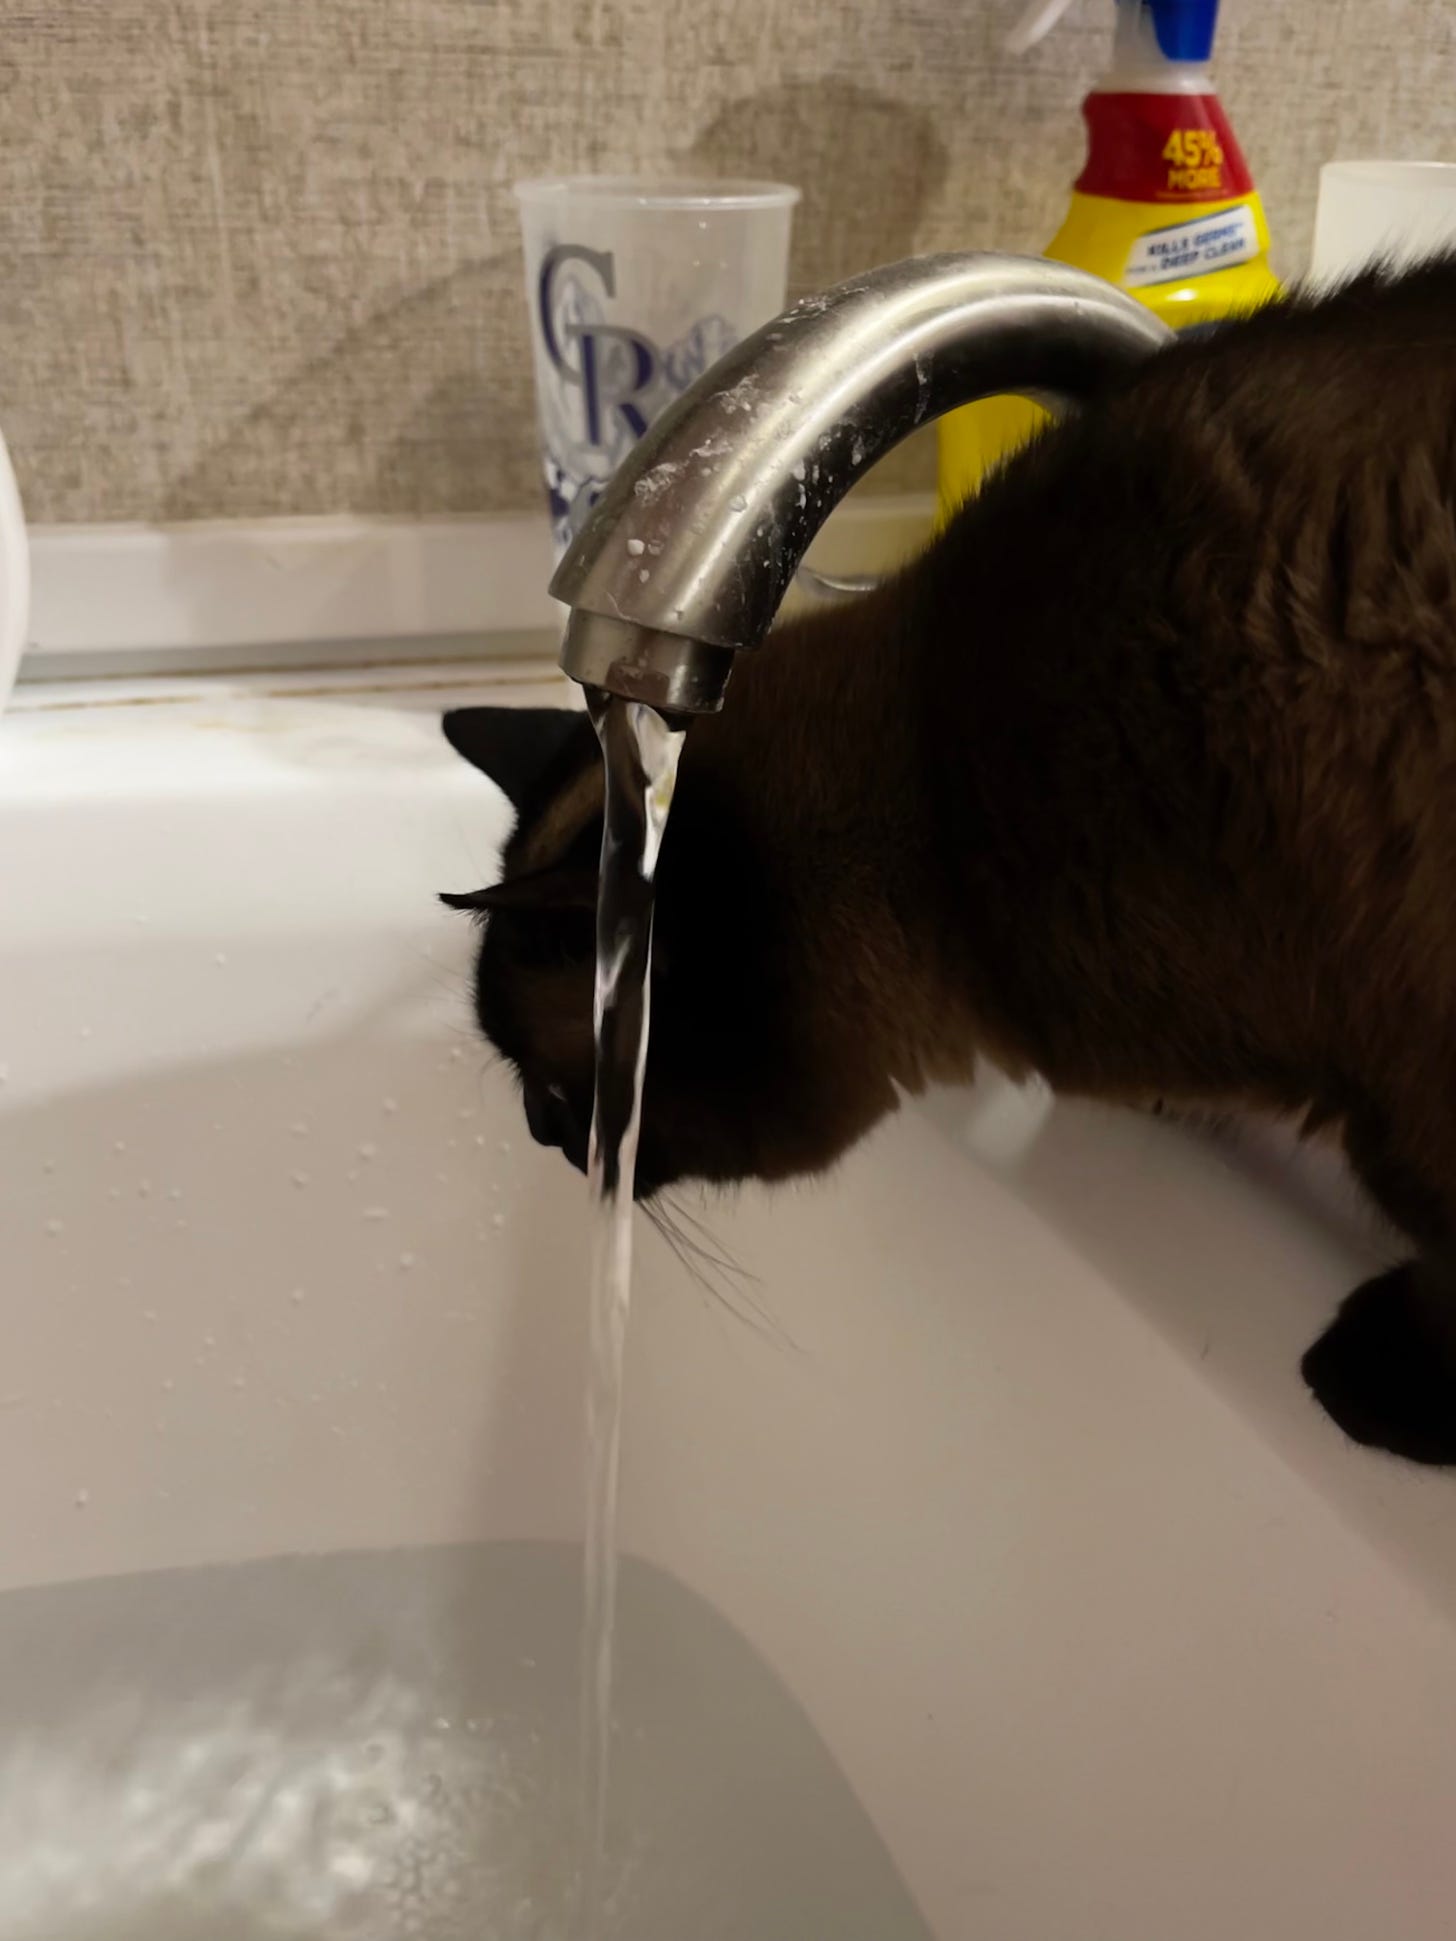 Siamese cat playing in the bathtub faucet